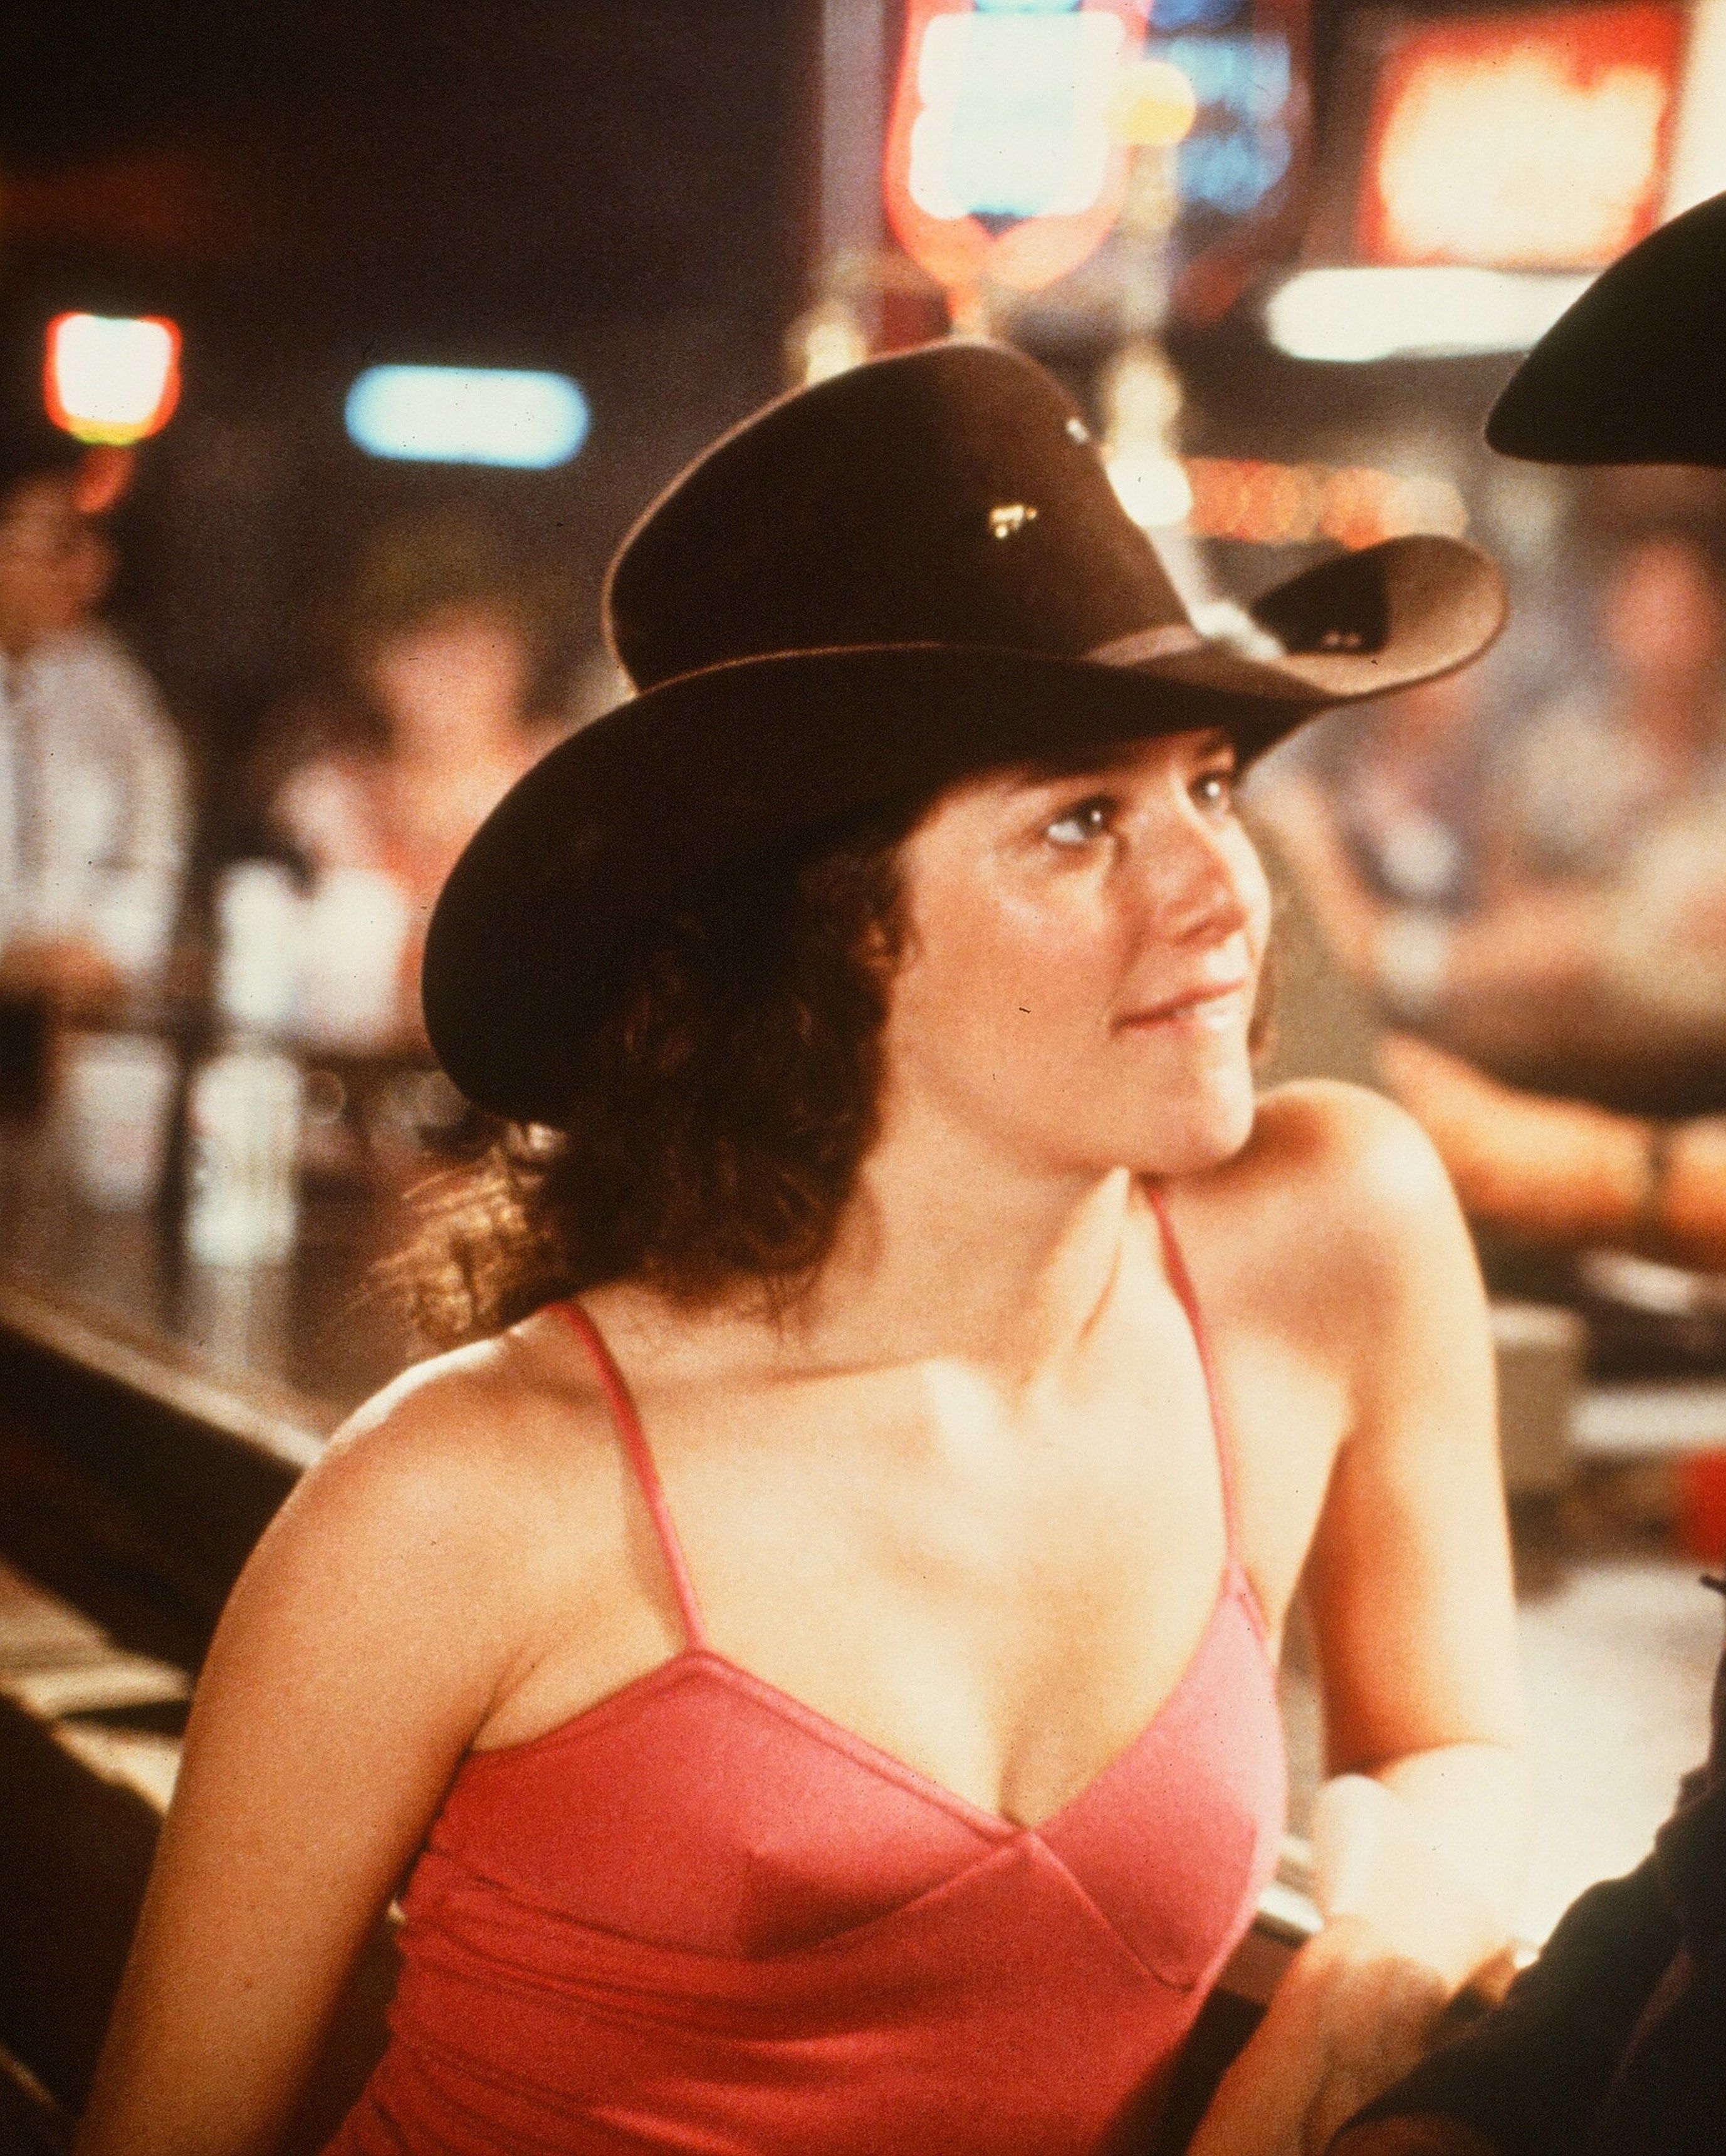 circa 1980 actor john travolta and debra winger talk in a scene during the paramount pictures movie 'urban cowboy" circa 1980 photo by hulton archivegetty images